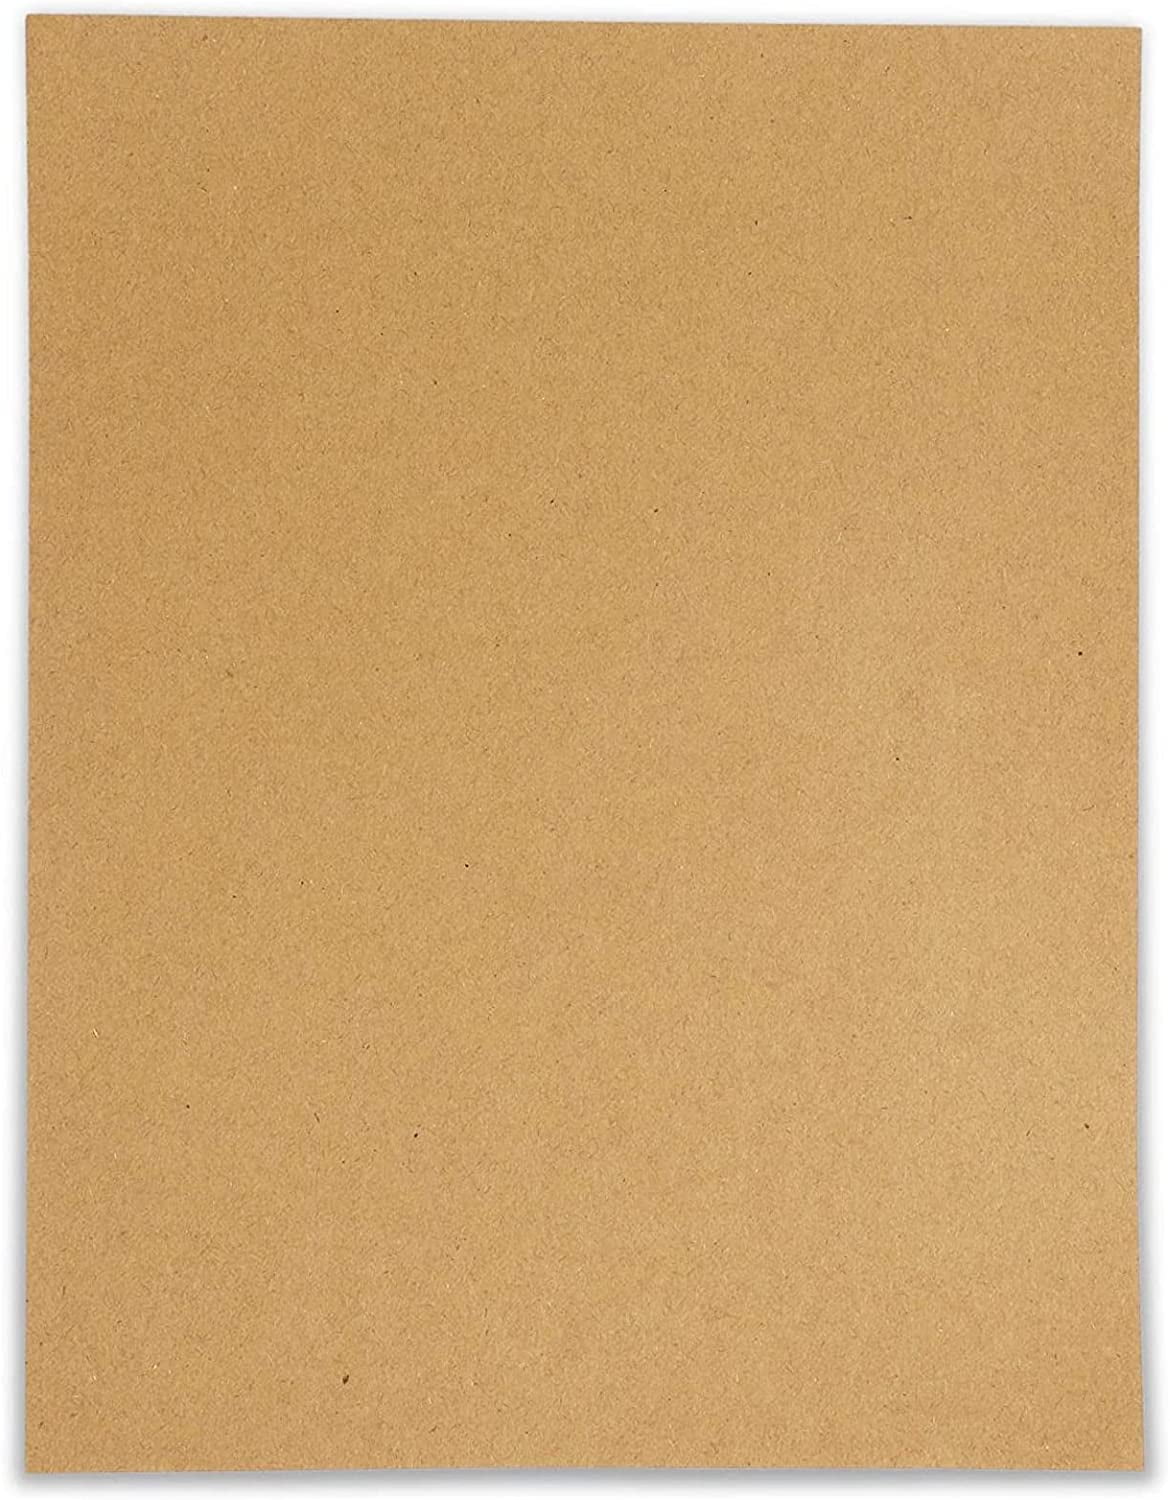 200 Pack Brown Craft Paper for DIY Projects, Classroom, Letter Size Kraft  Paper Material Sheets, 130gsm (8.5 x 11 In) 